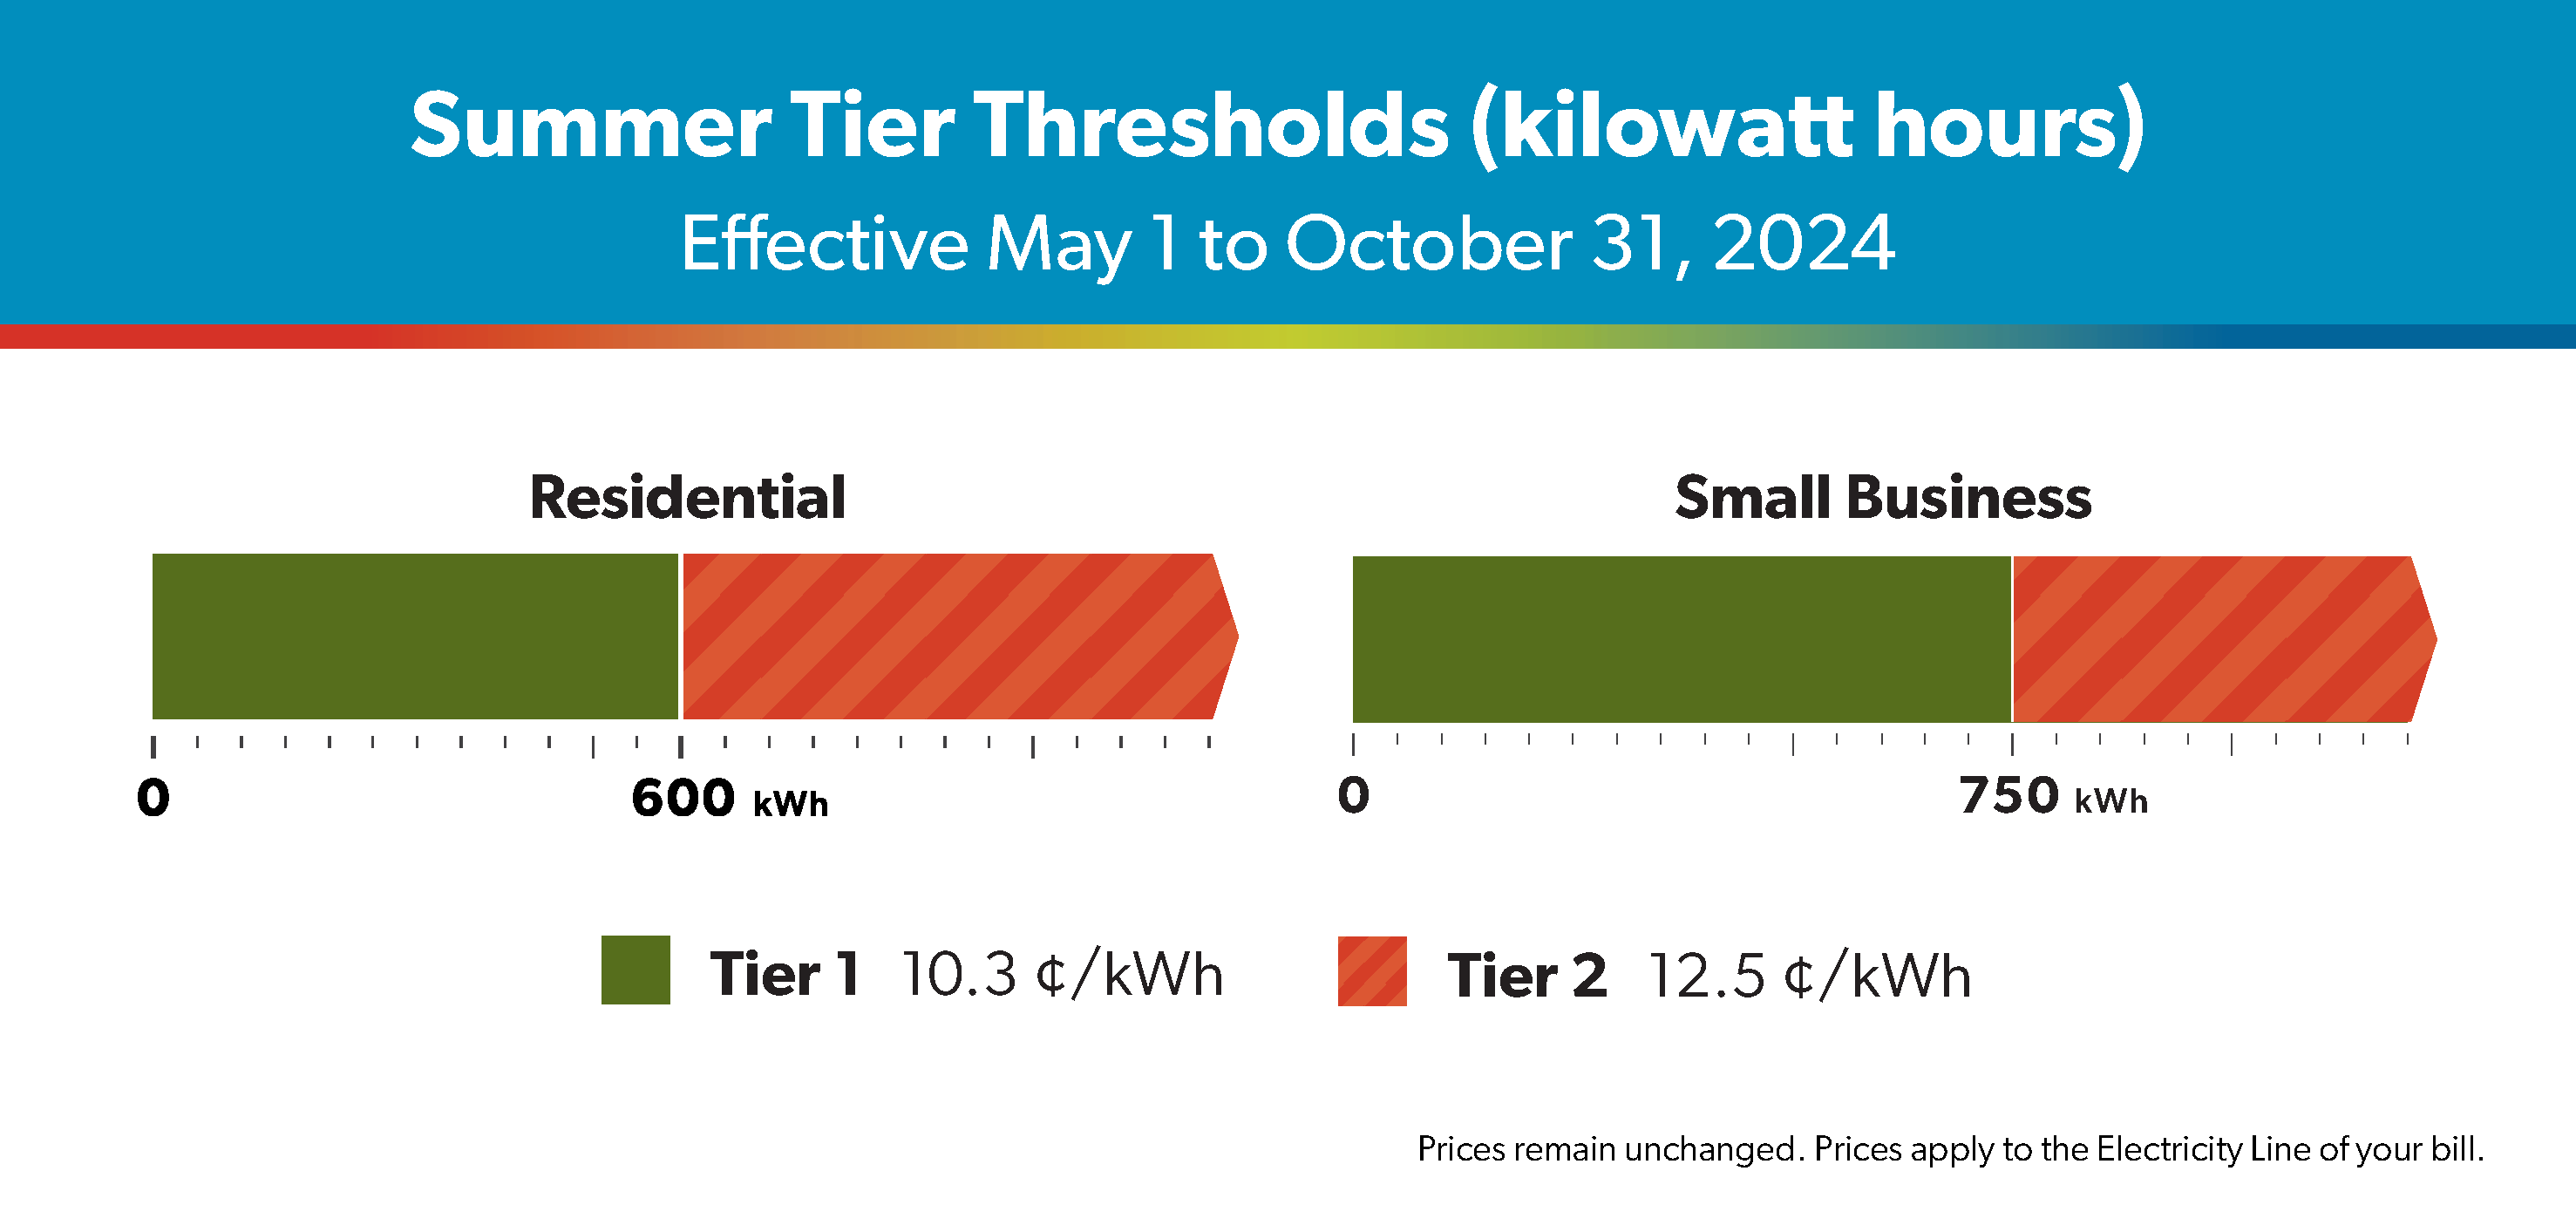 Summer tier threshold rates for period May 1 to October 31. Tier 1 rates are 10.3 cents per kilowatt-hour. Tier 2 is 12.5 cents per kilowatt-hour. Tier 2 rates are applicable for usage over 600 kilowatt-hours for residential customers and 750 kilowatt-hours for small business customers.